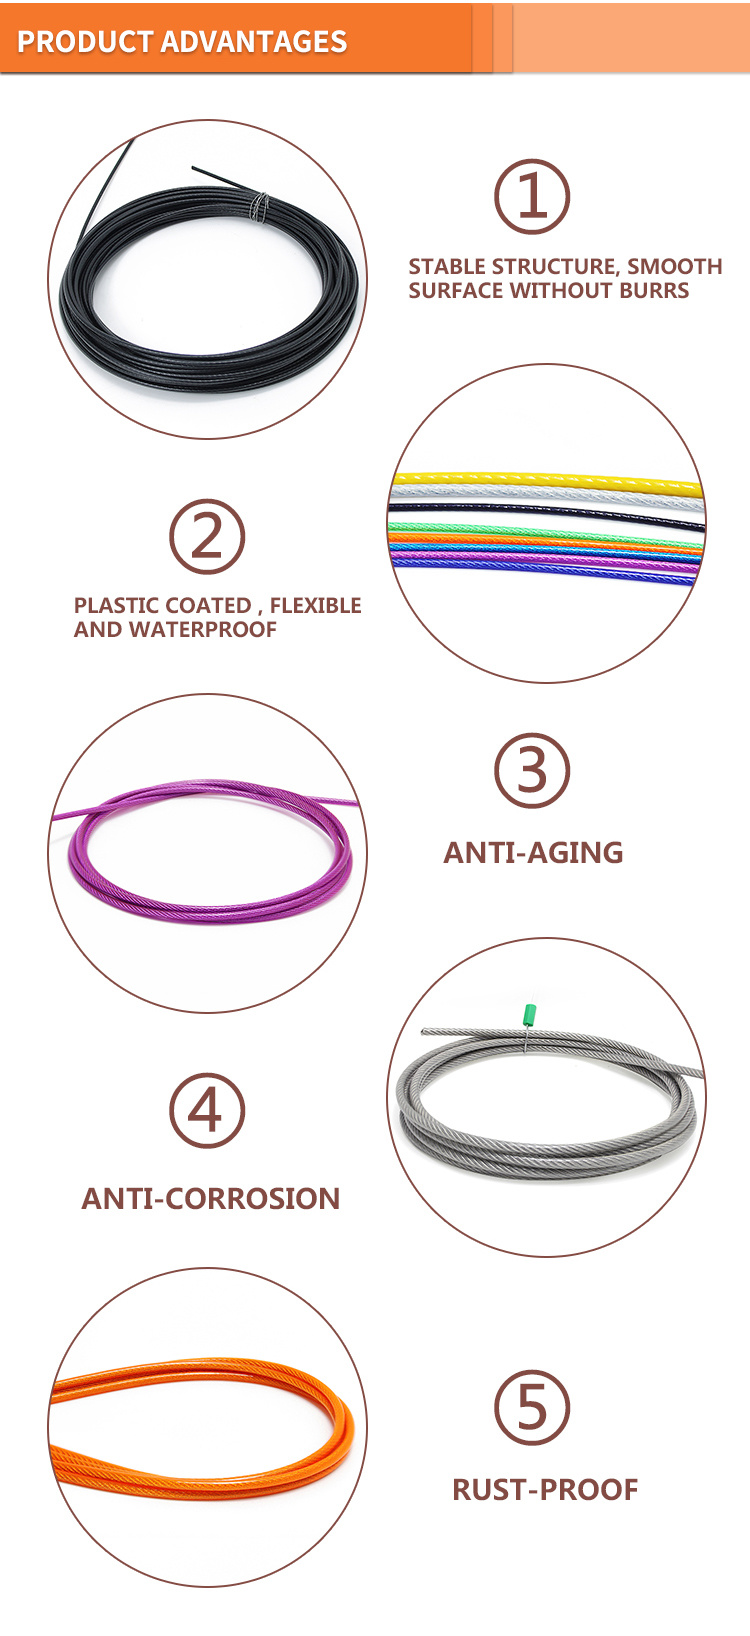 Plastic Coated Steel Wire Rope Two Rope Colorful PU PVC Coated Steel Wire Rope